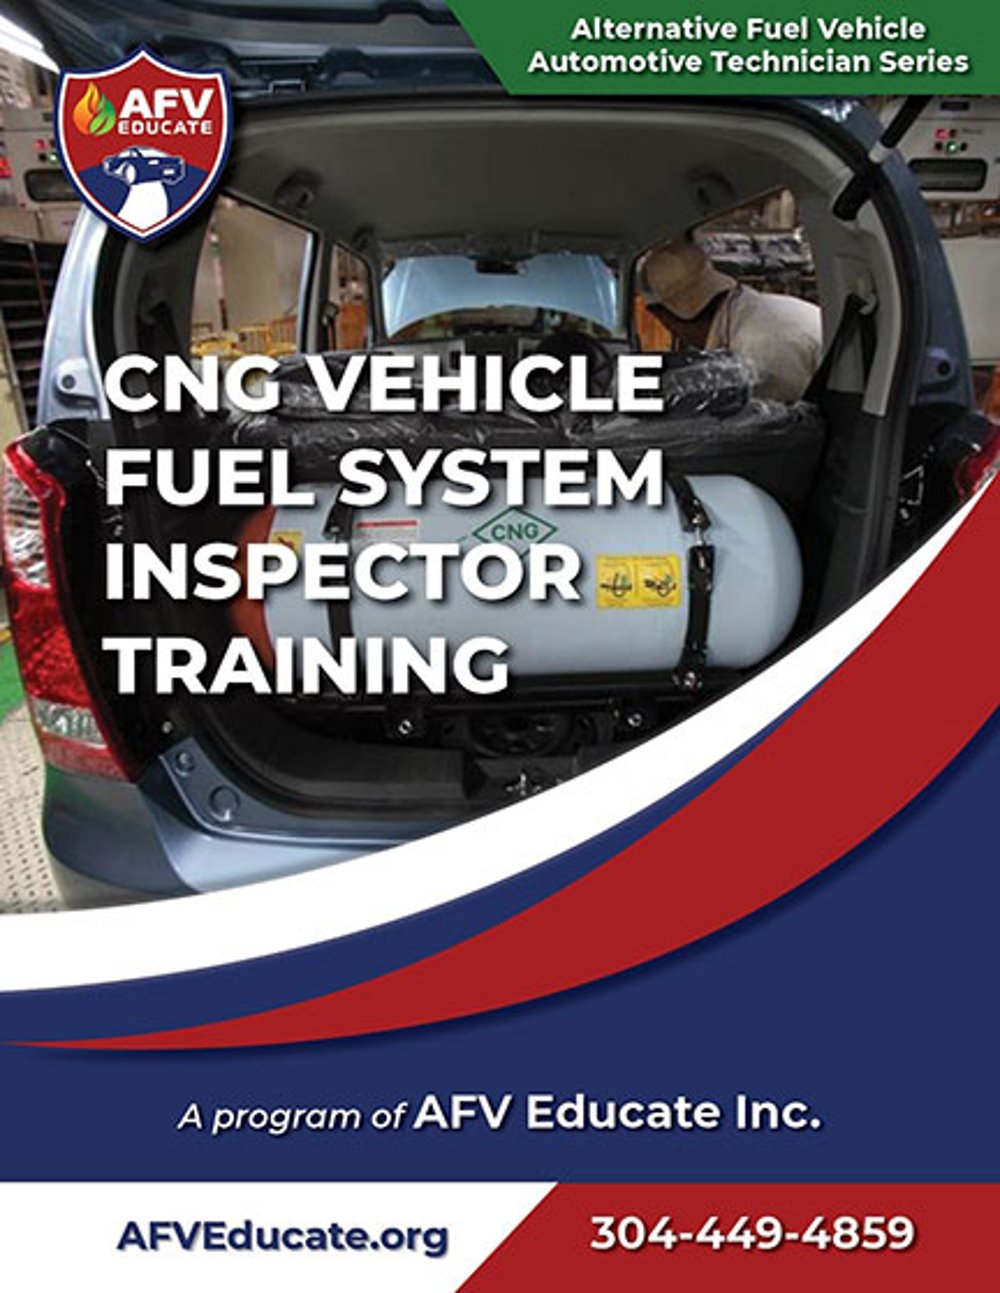 AFV Educate CNG Vehicle Fuel System Inspector Training Manual